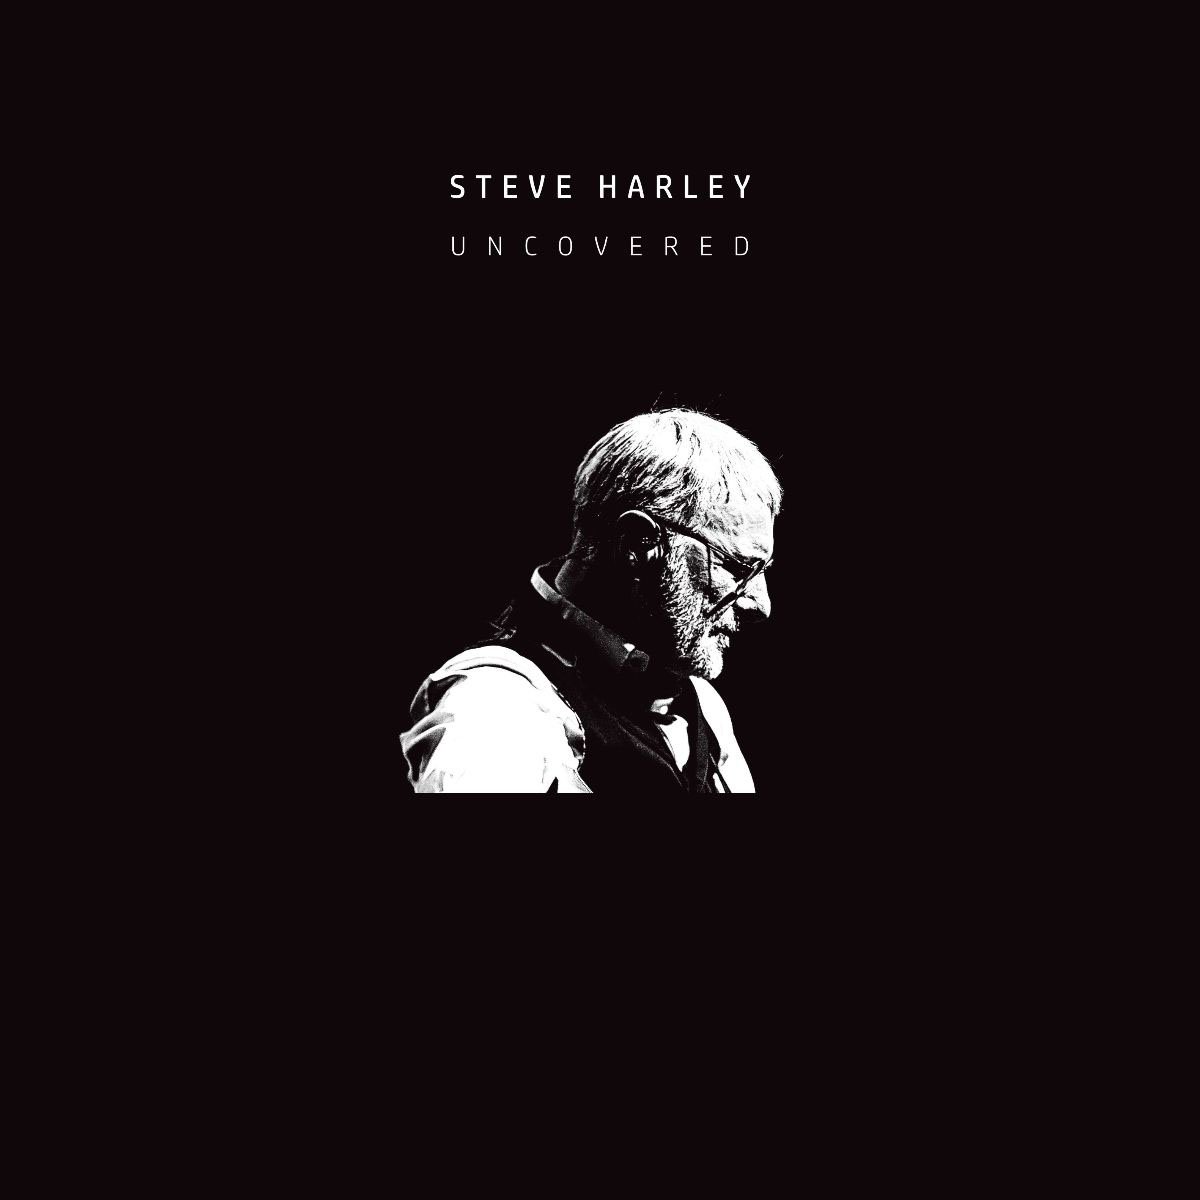 STEVE HARLEY Releases video for 'I've Just Seen A Face' from his forthcoming 'Uncovered' album 